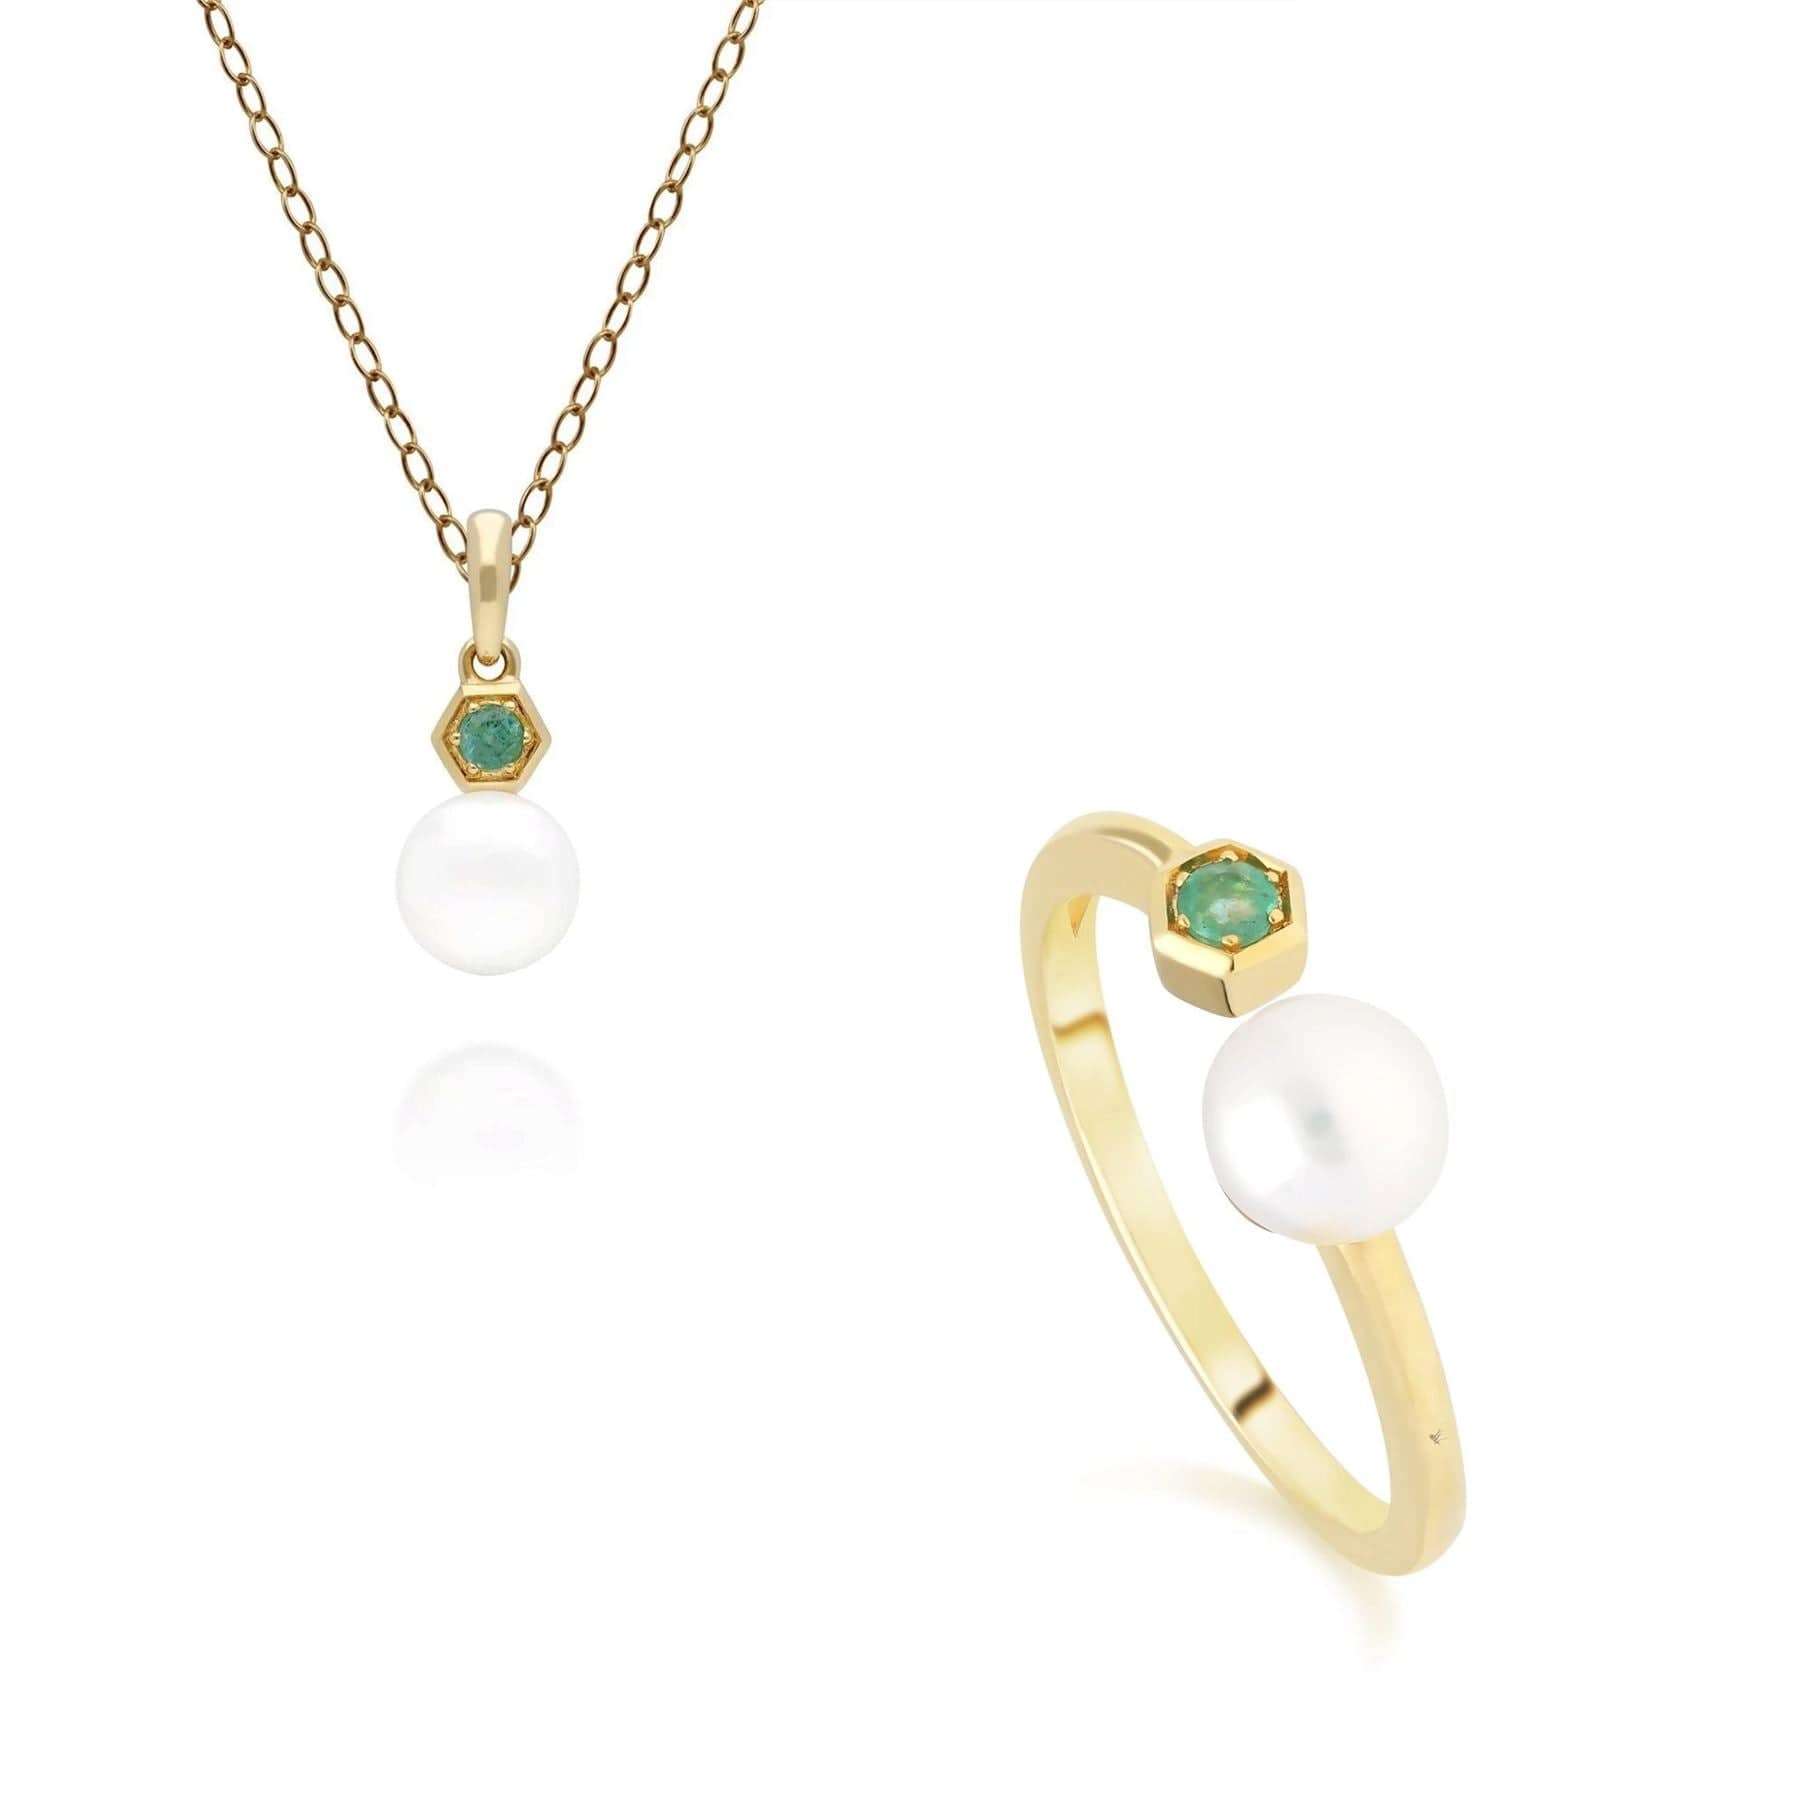 135P1965019-135R1840019 Modern Pearl & Emerald Pendant & Ring Set in 9ct Gold 1